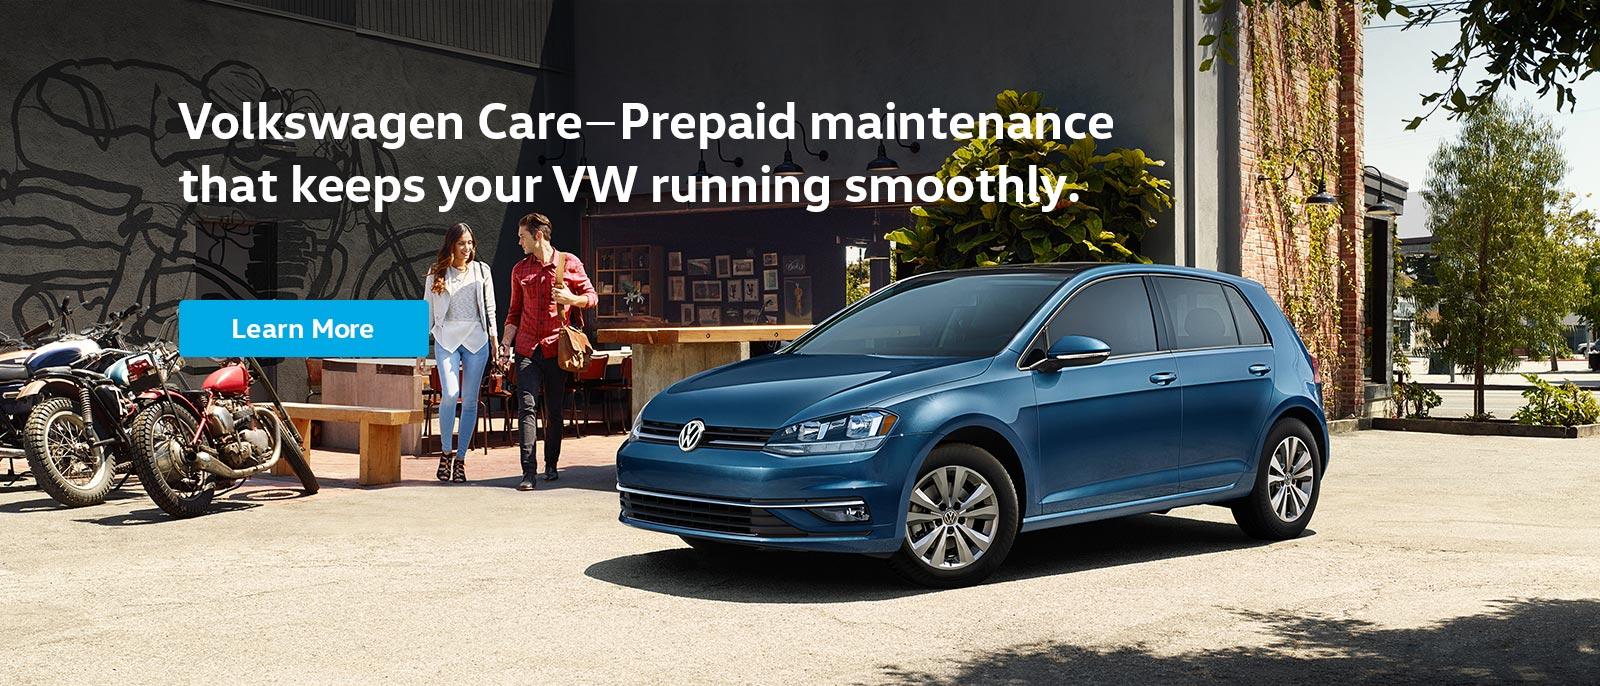 Volkswagen Care - Prepaid maintenance that keeps your VW running smoothly.